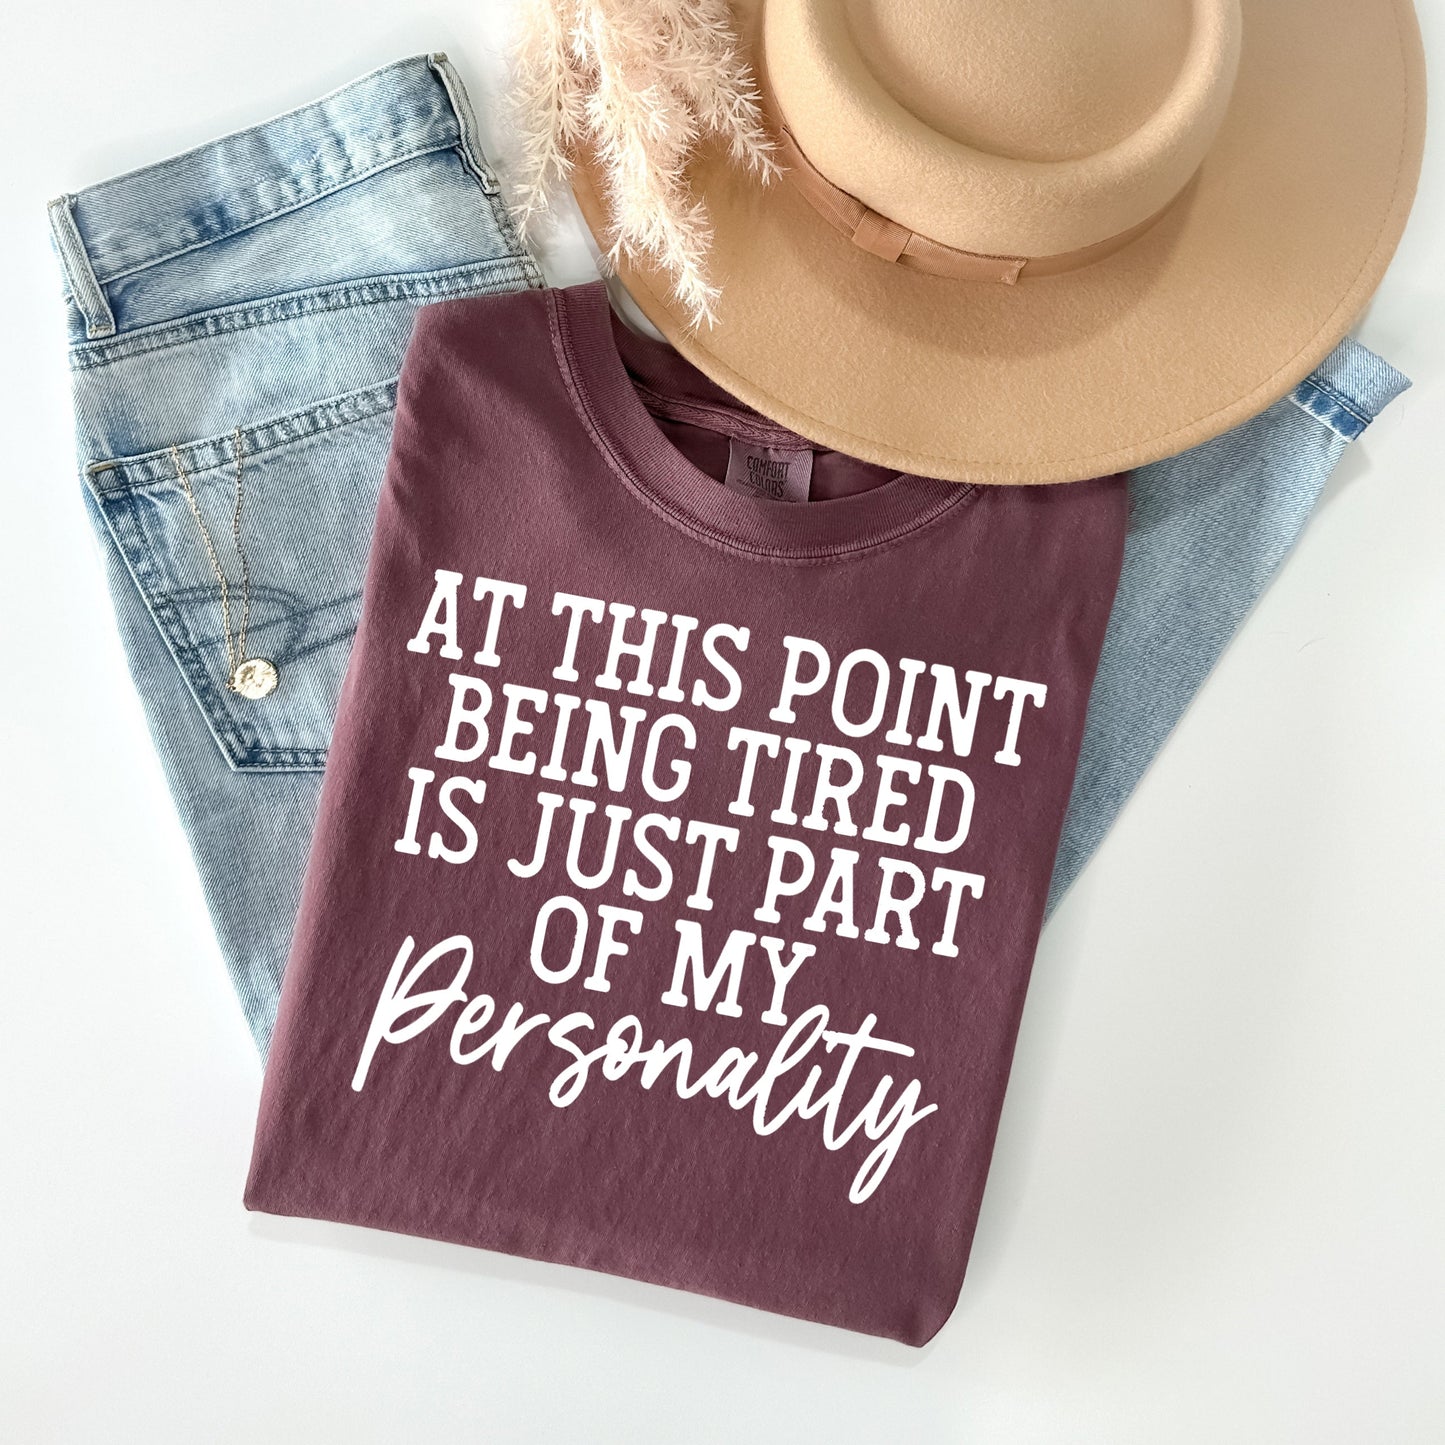 At This Point Being Tired is Just Part of My Personality - Comfort Colors Graphic Tee